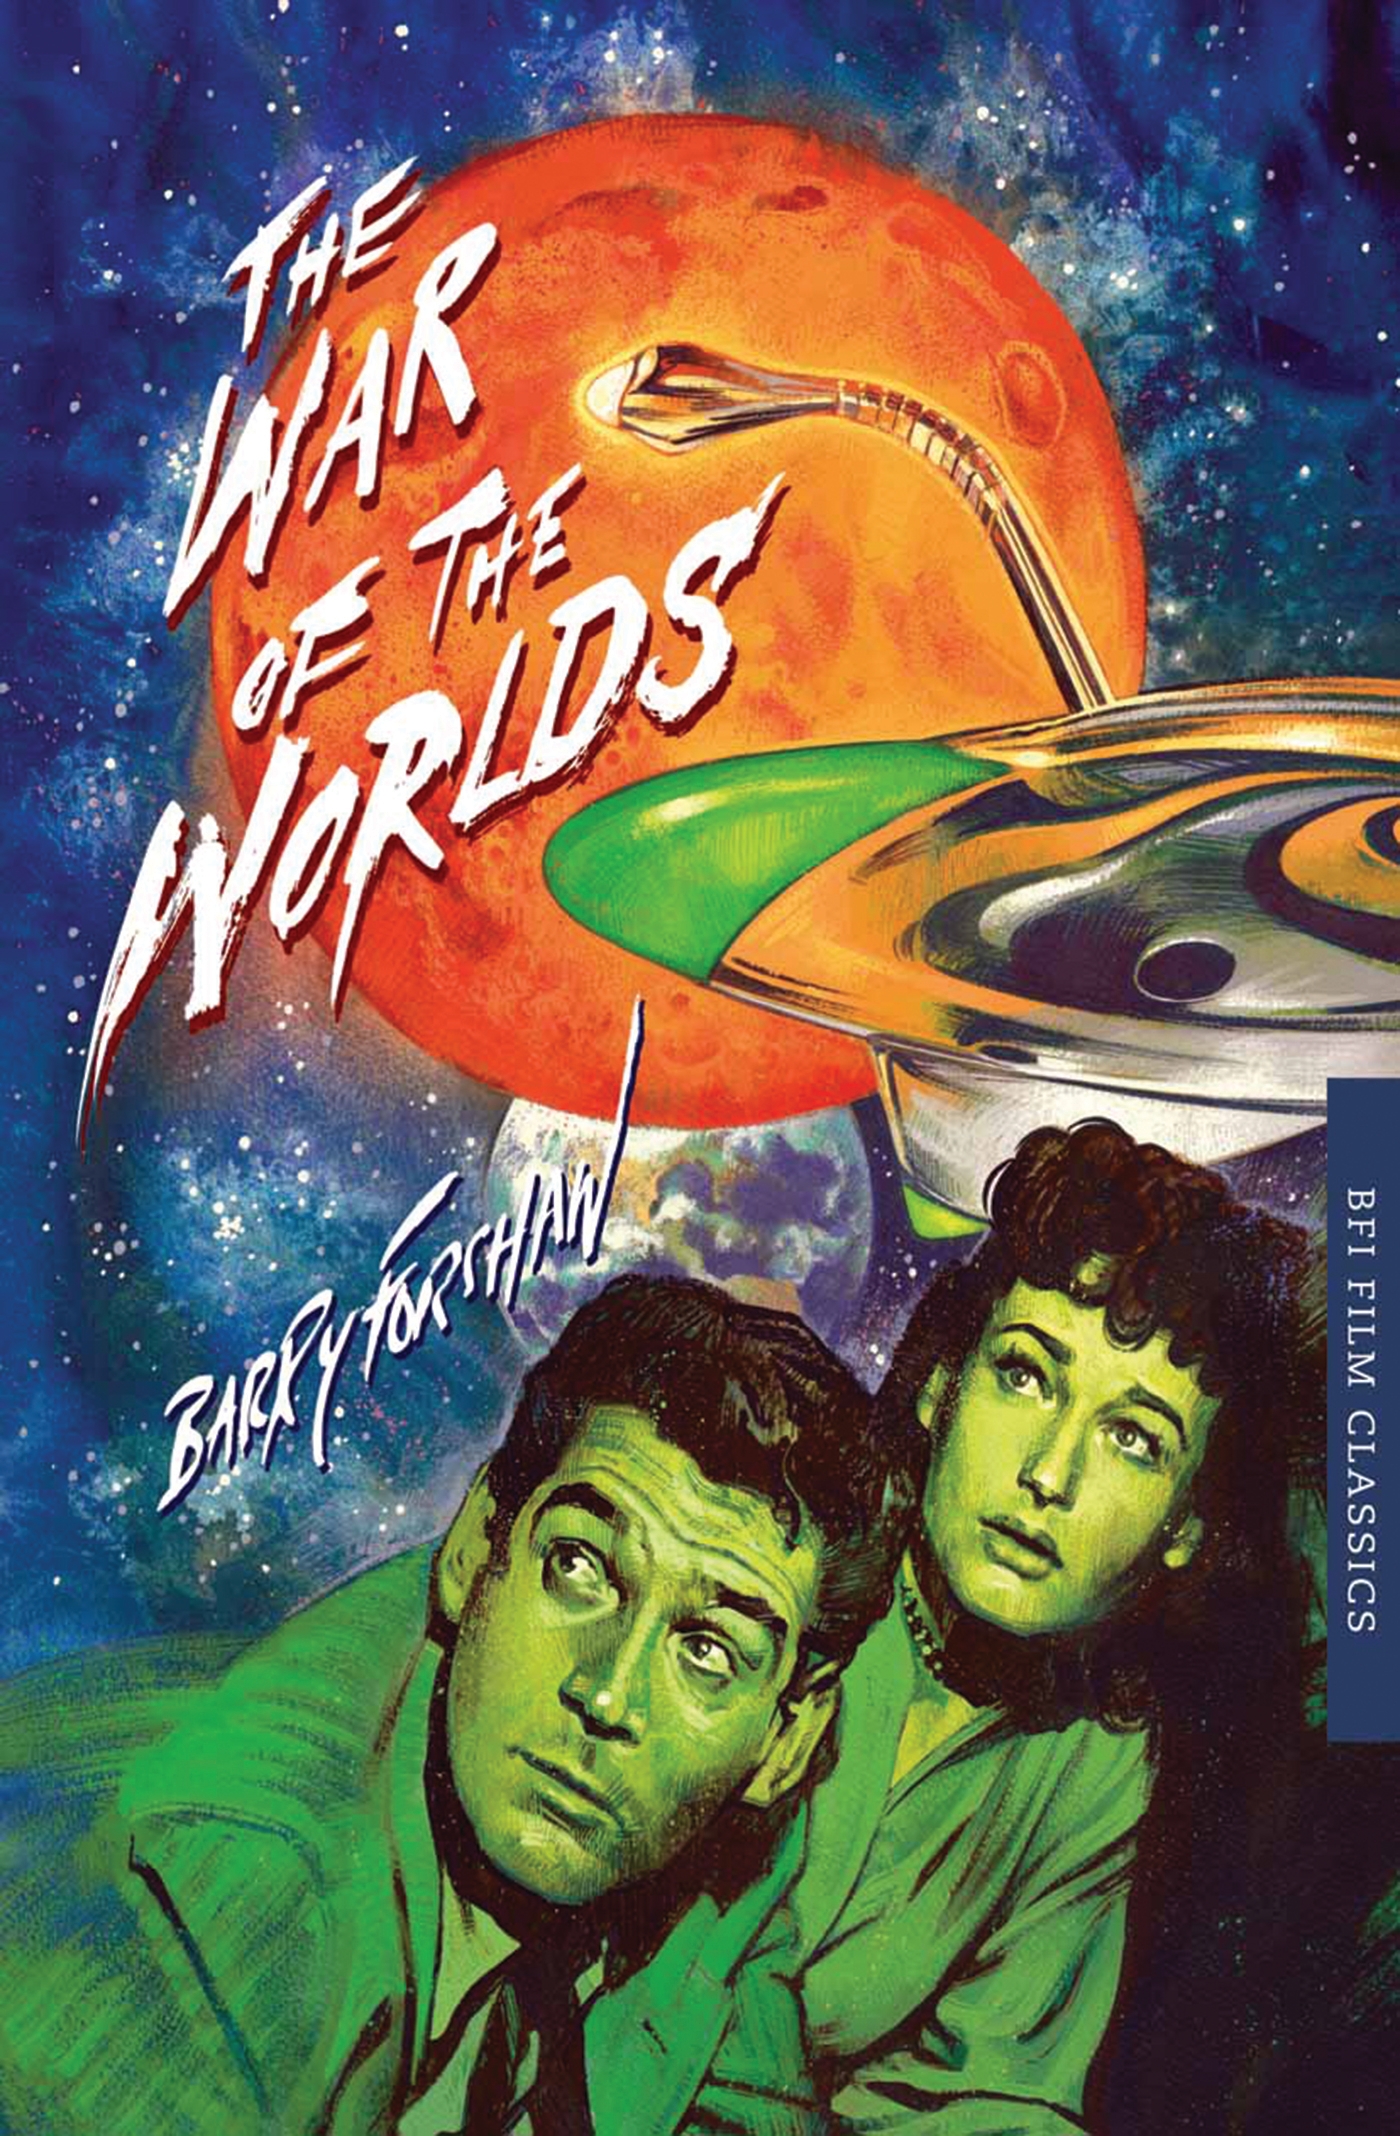 The War of the Worlds - 10-14.99